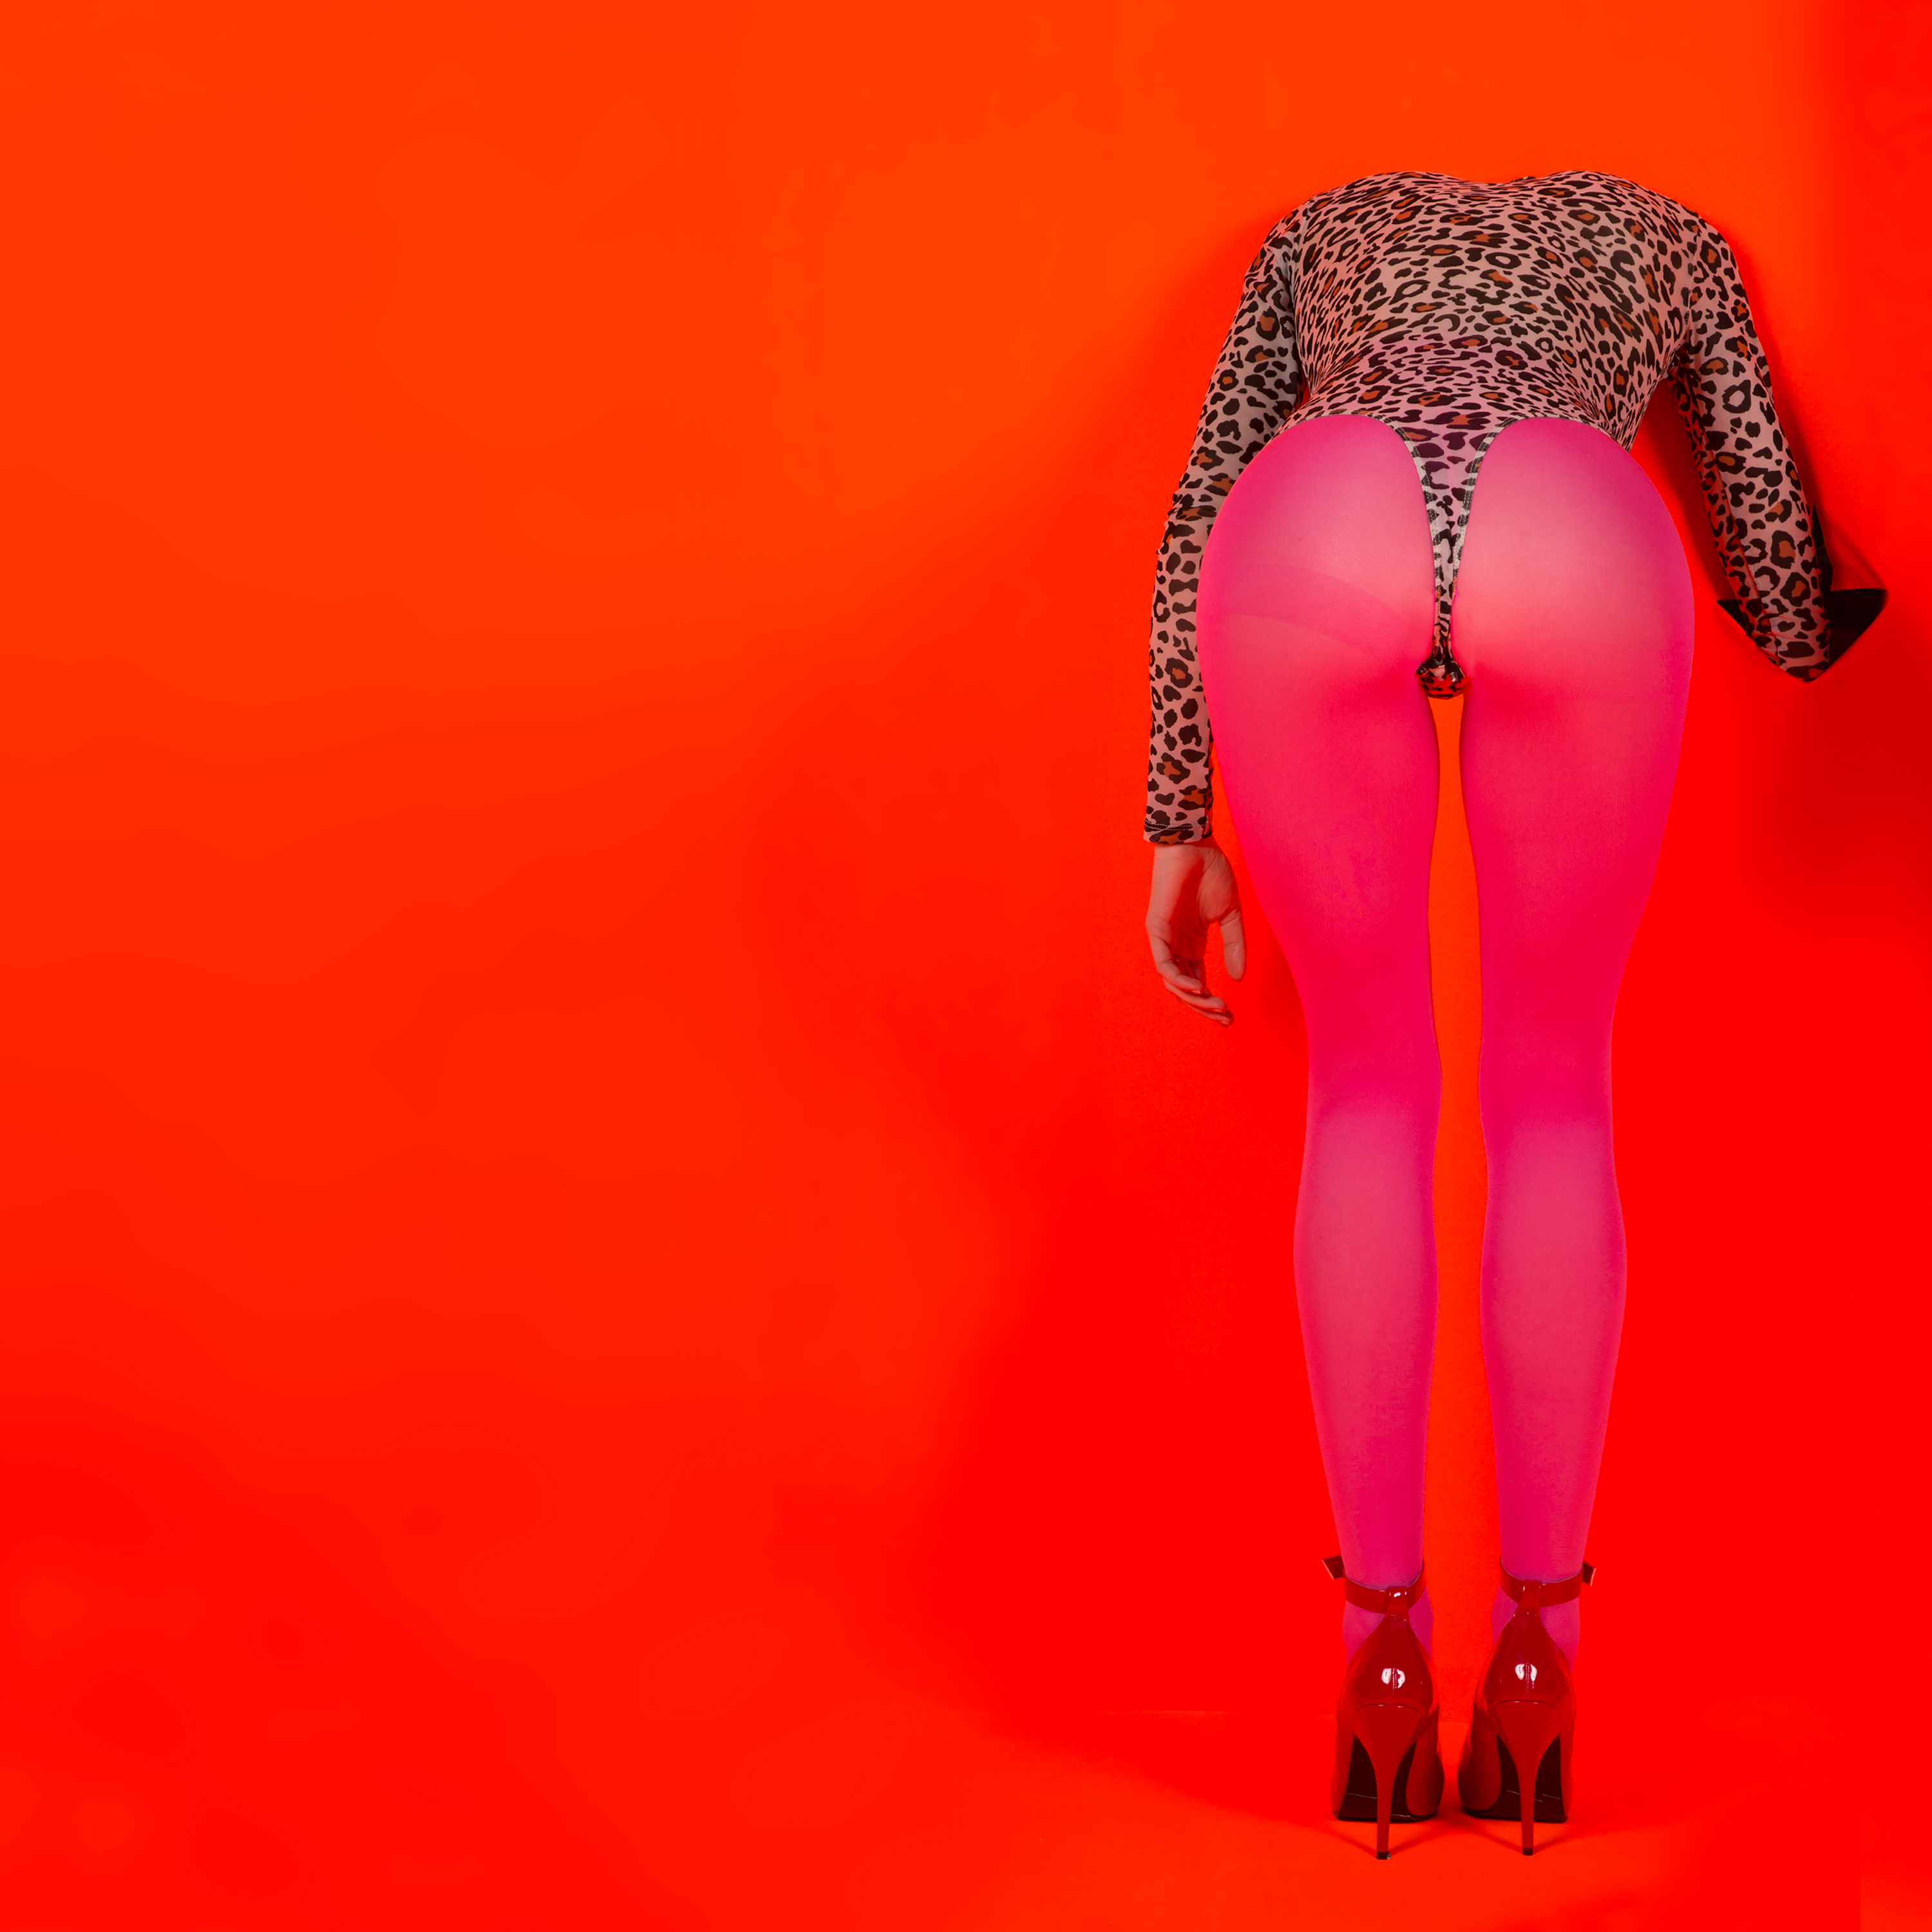 Review of MASSEDUCTION by St. Vincent: